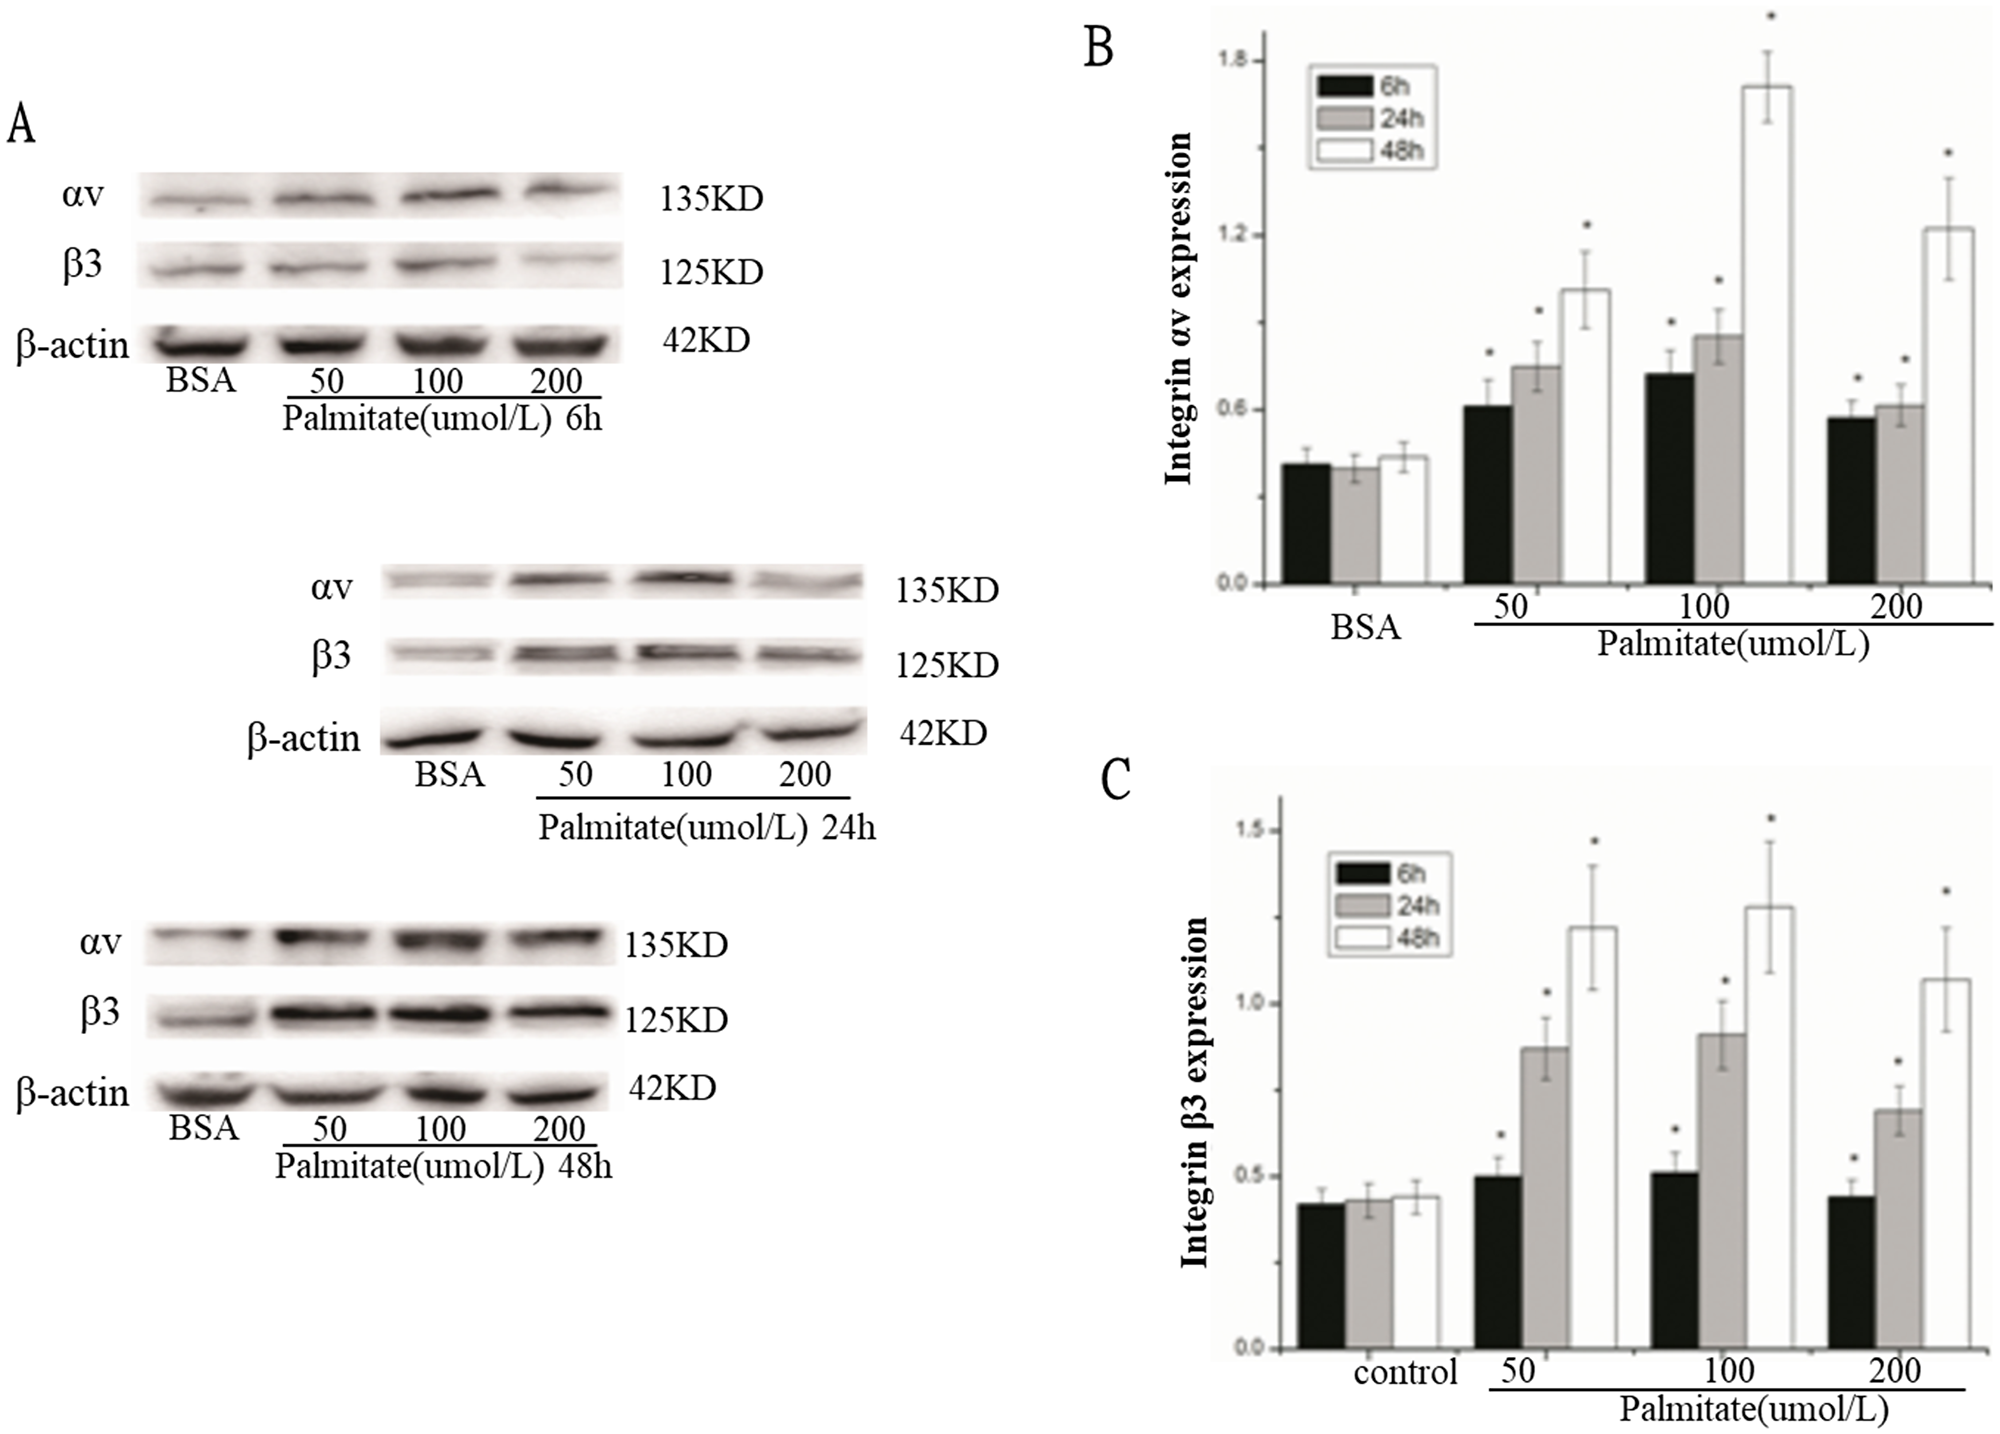 Palmitate increased the protein expression of integrin αv and integrin β3 in HLSECs.